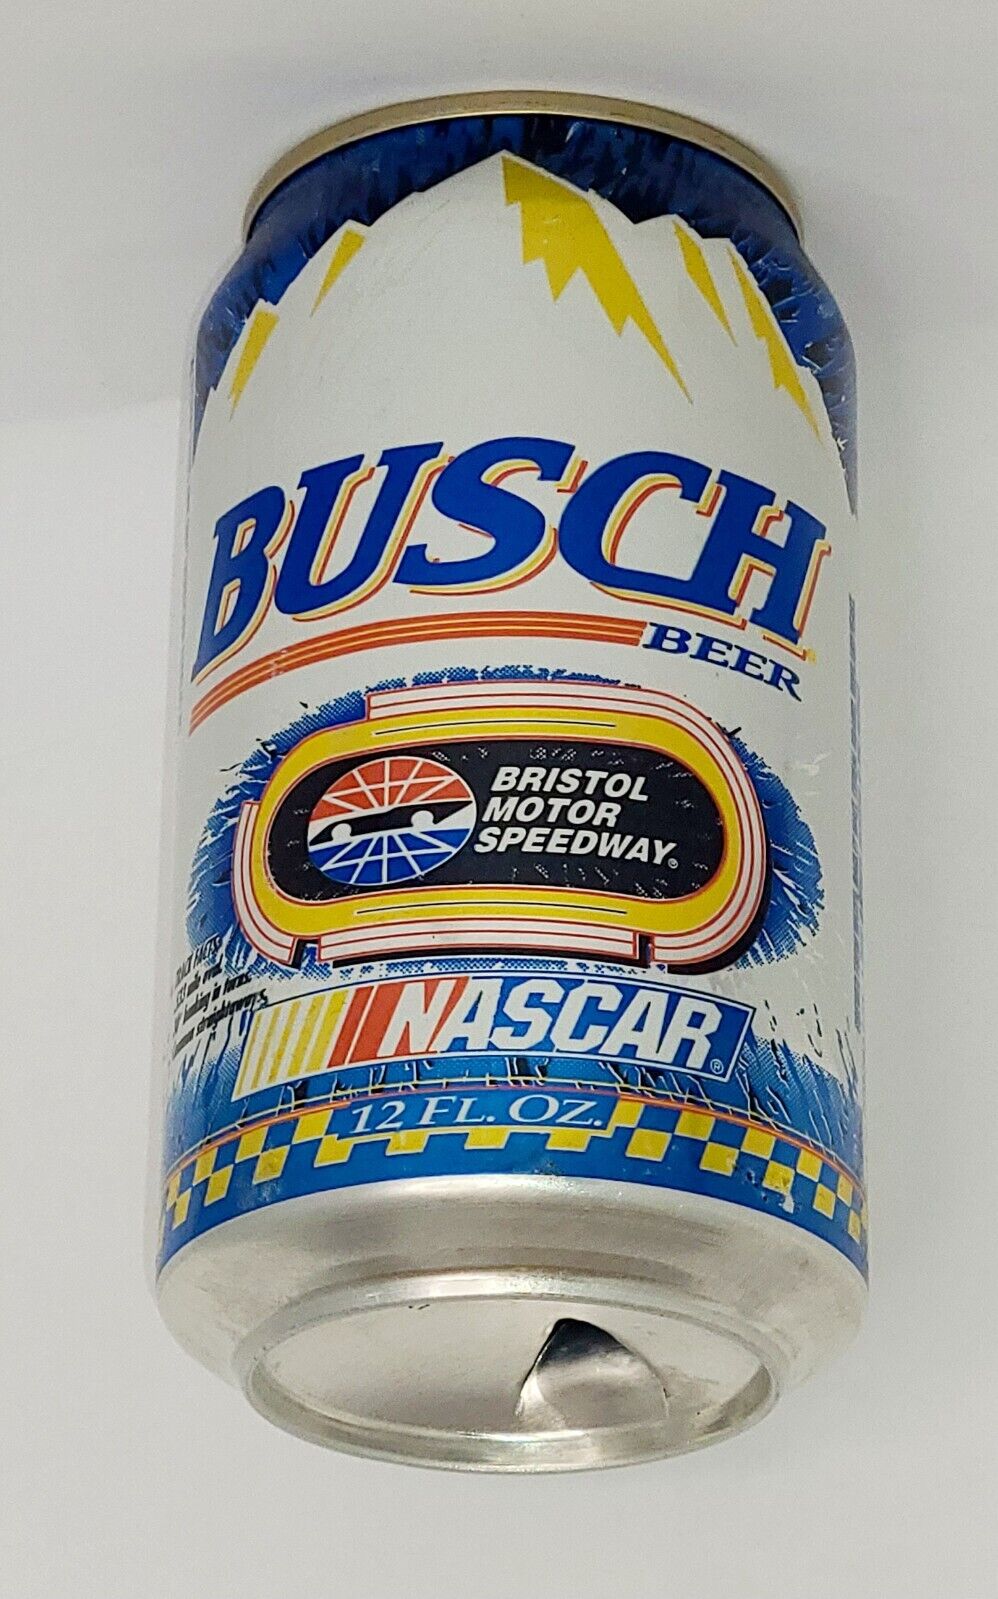 1997 BRISTOL MOTOR SPEEDWAY NASCAR STOCK CAR RACE TRACK BUSCH BEER CAN TENNESSEE